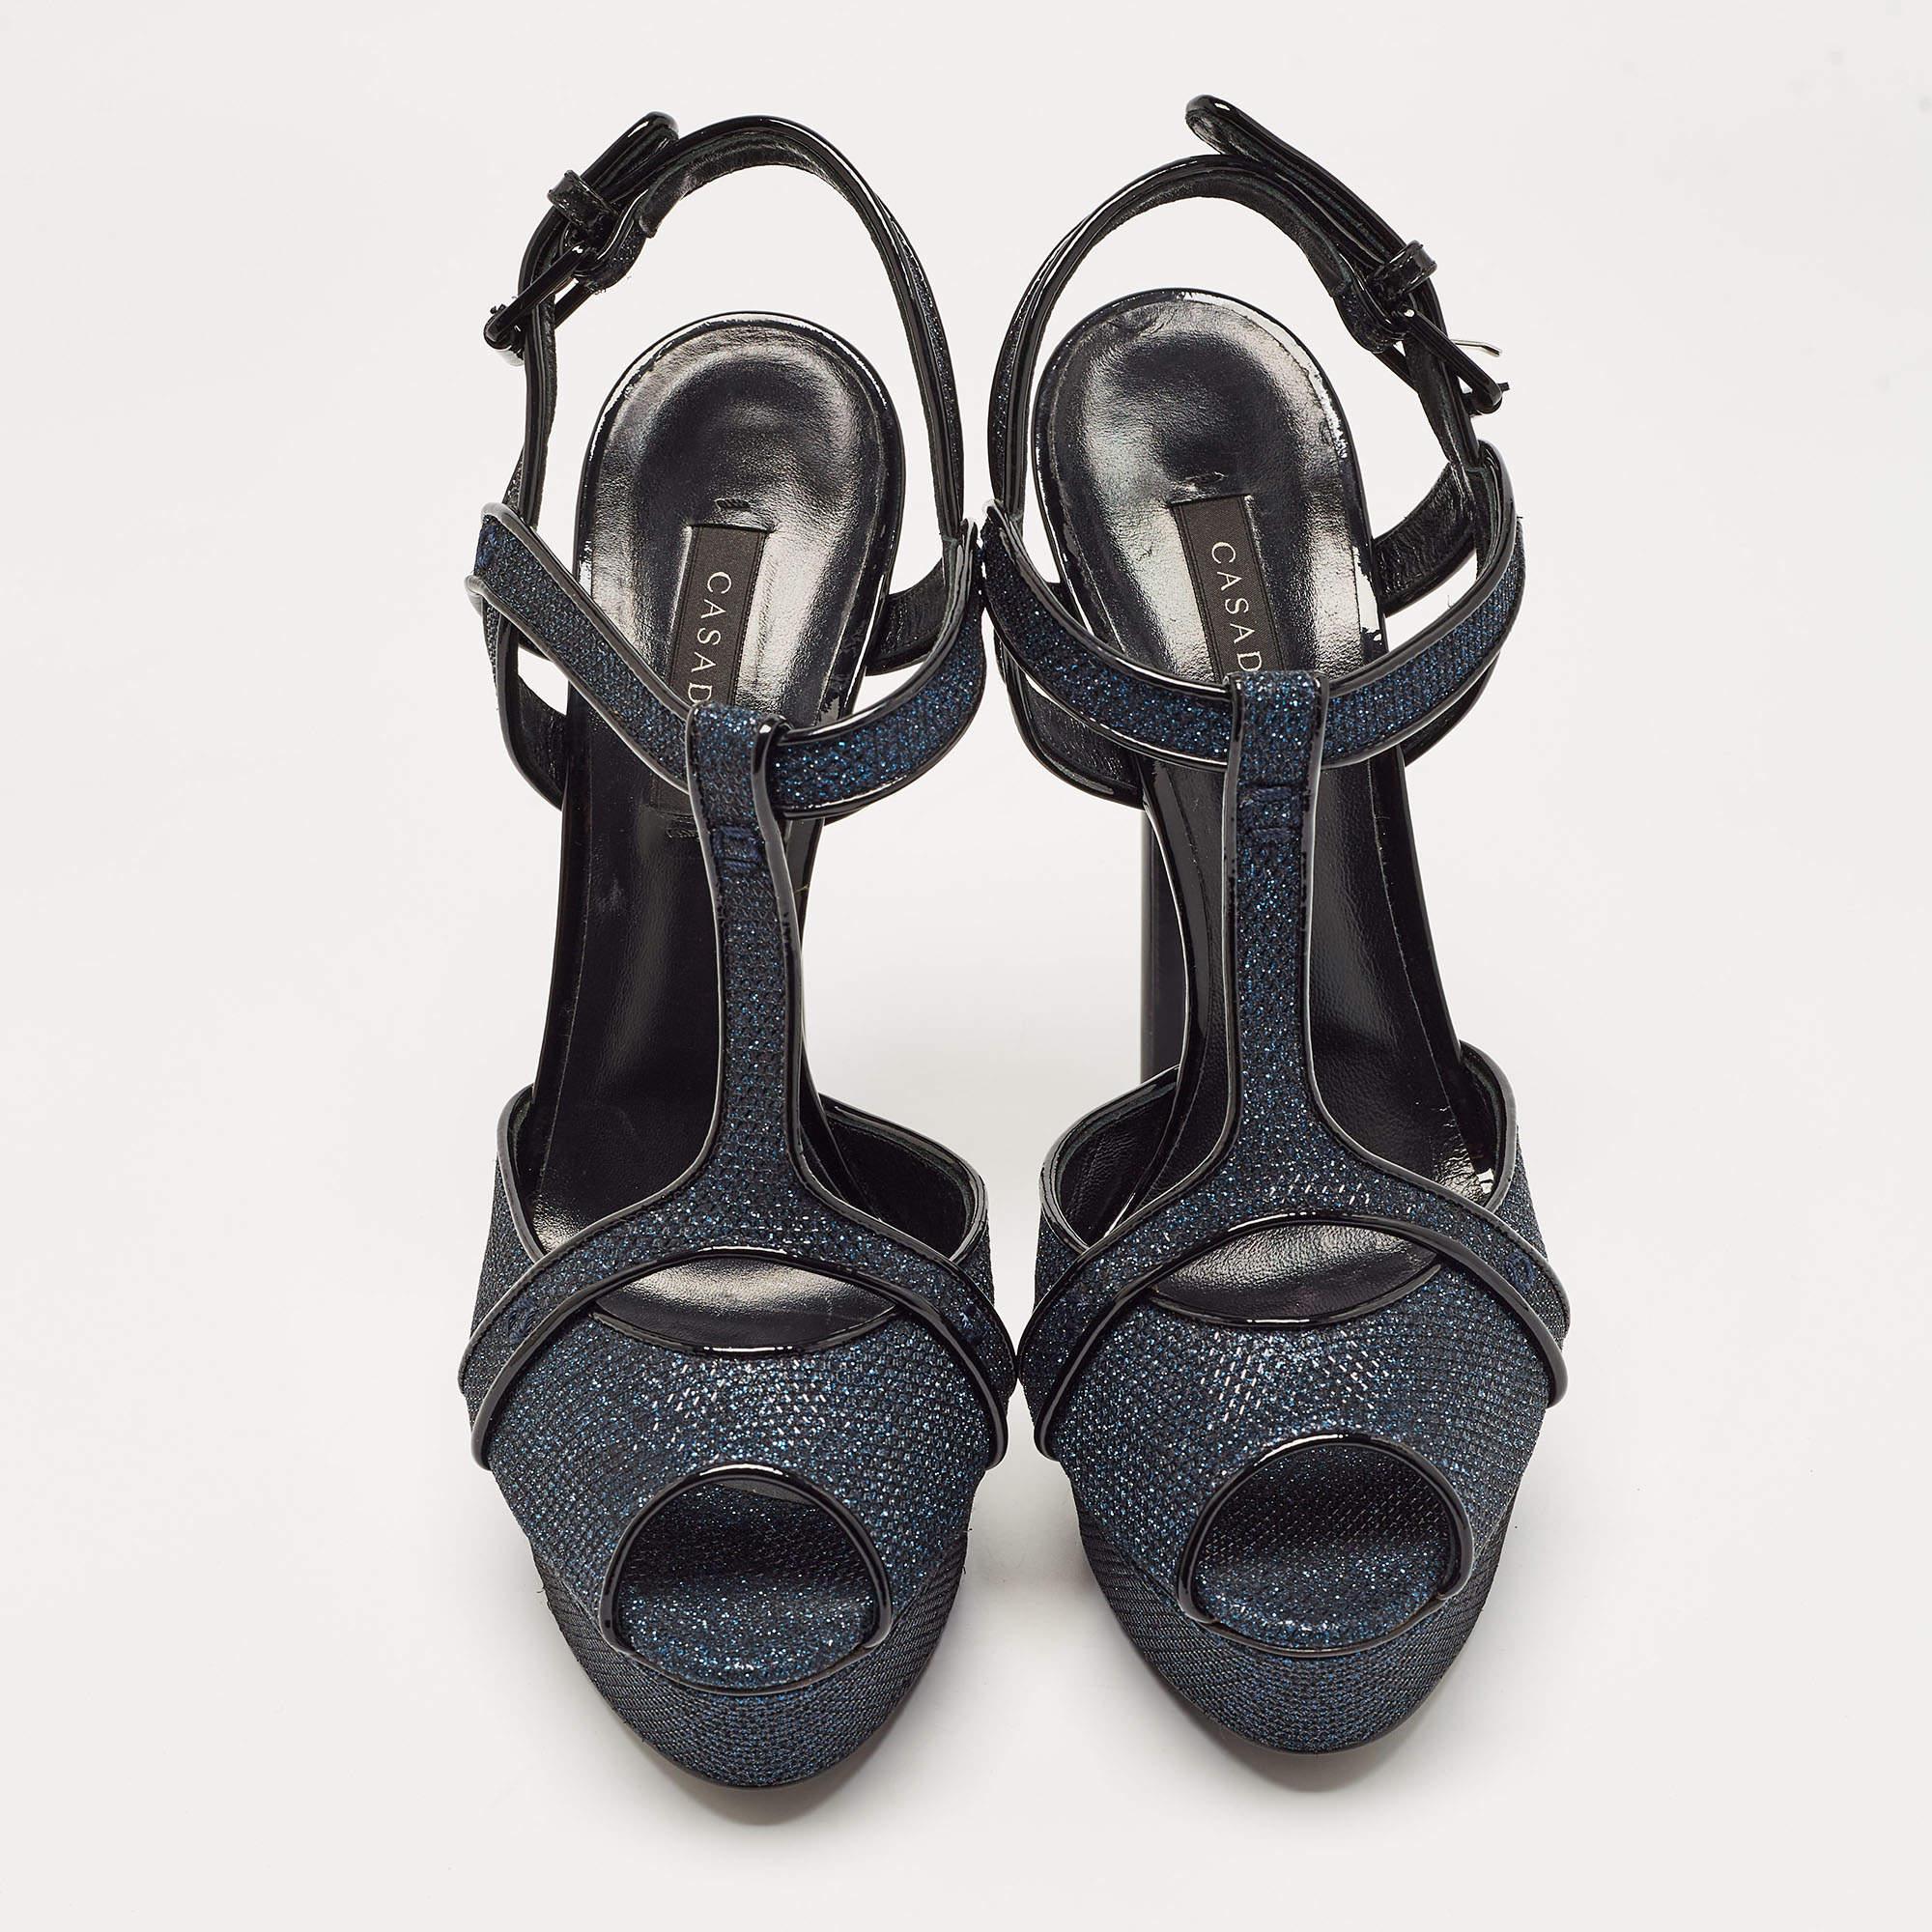 Perfectly sewn and finished to ensure an elegant look and fit, these Casadei platform sandals are a purchase you'll love flaunting. They look great on the feet.

Includes: Original Box

